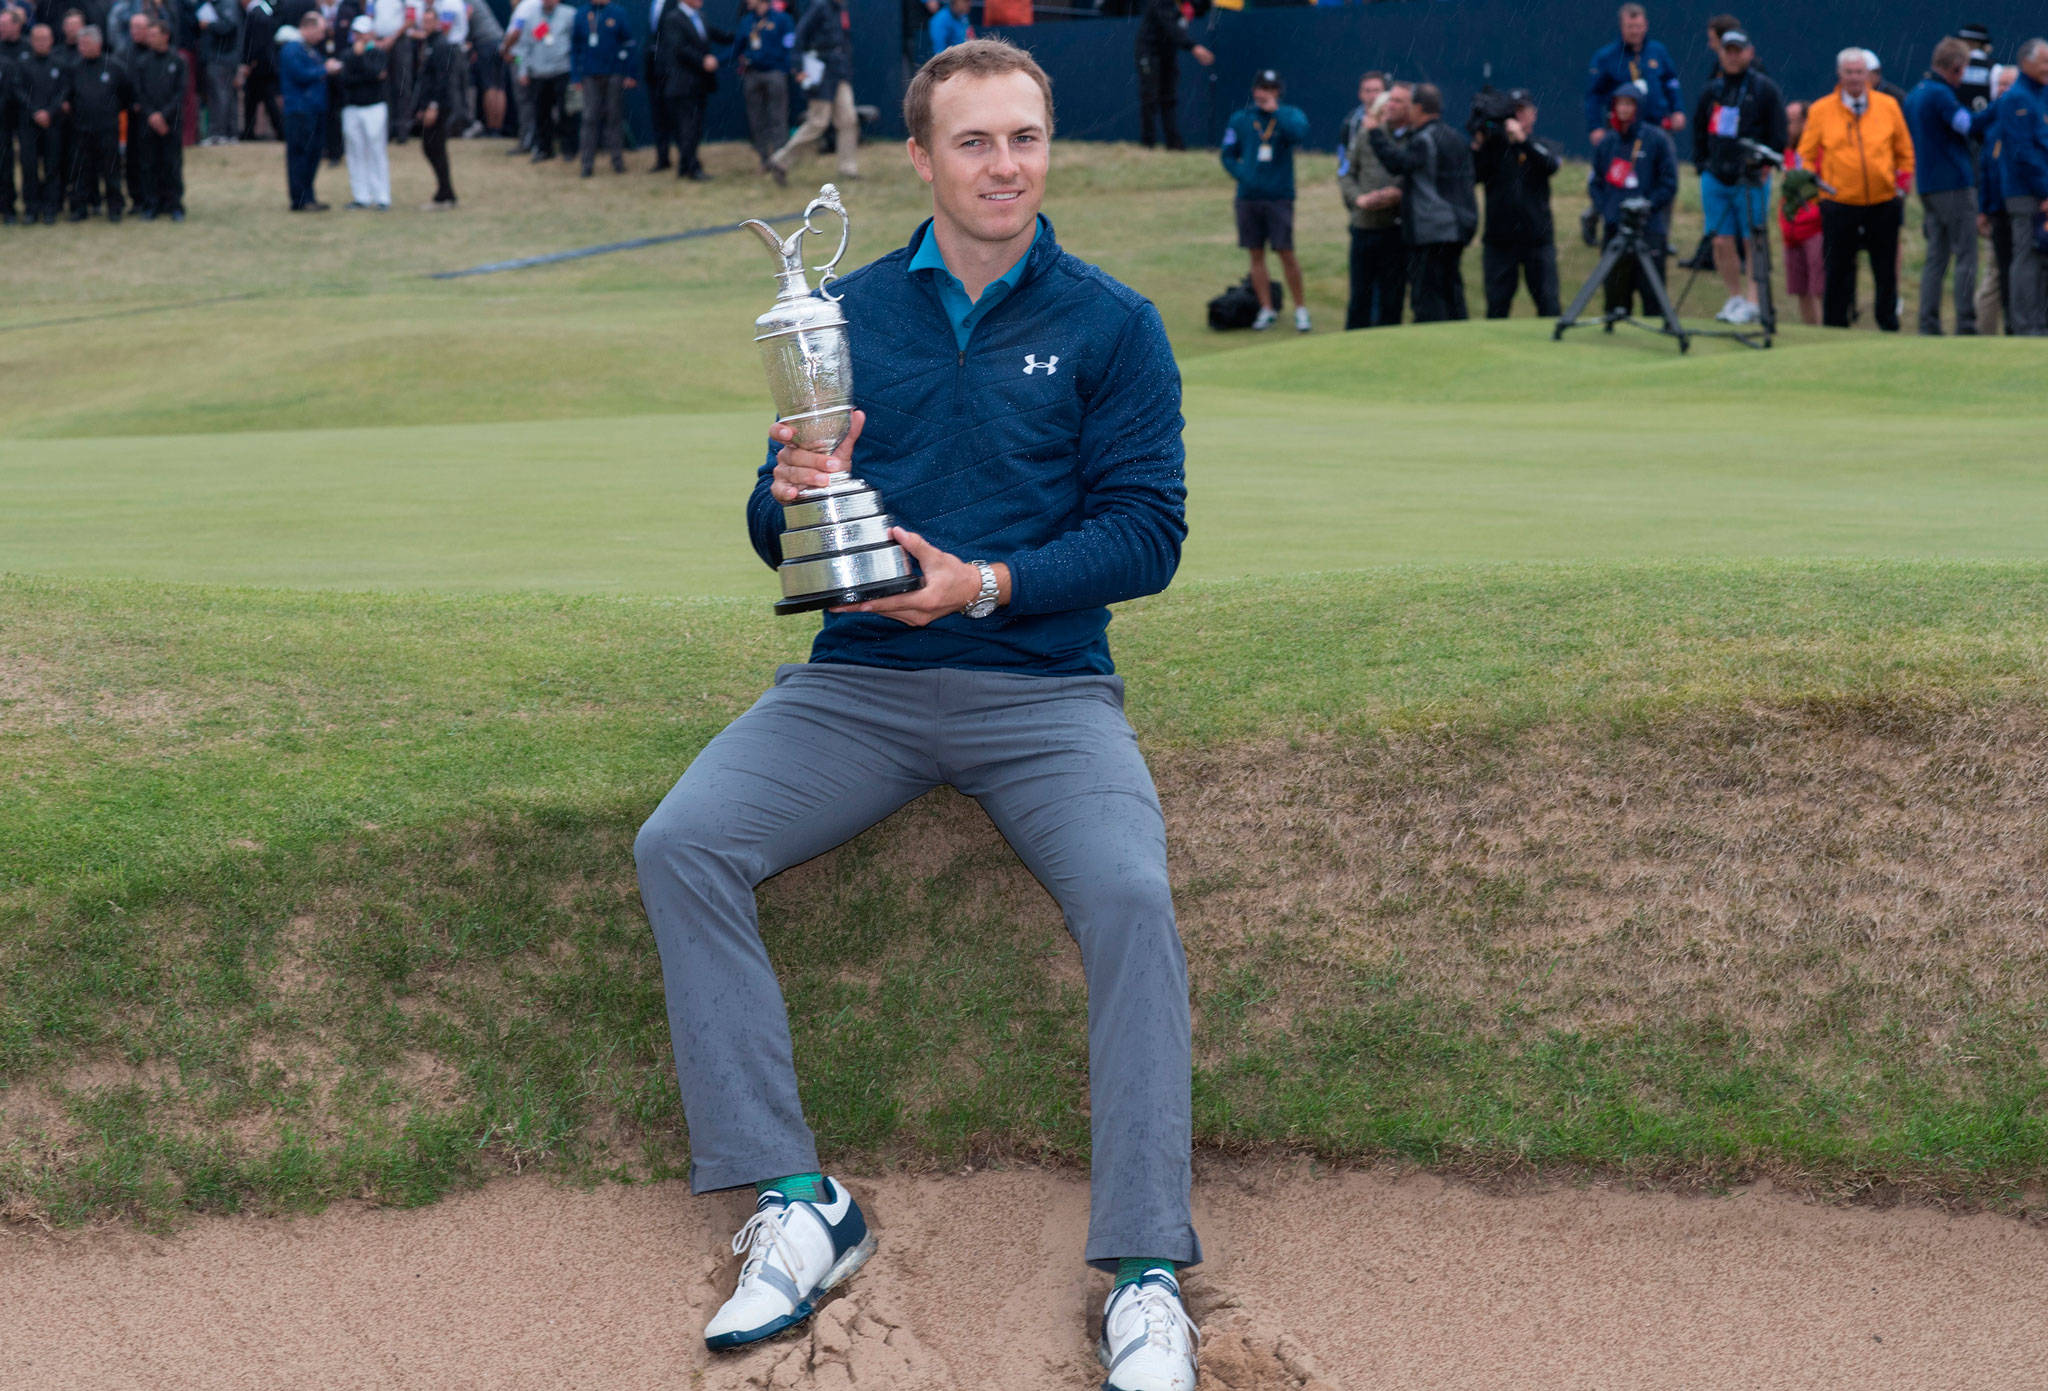 (Rex Shuttlestock | Zuma Press) Jordan Spieth sits down on the lip of a pot bunker near the 18th green at Royal Birkdale with the Claret Jug on Sunday afternoon in Southport, England. Spieth used a finishing run of 5-under par on the last five holes to win the 146th Open Golf Championship.